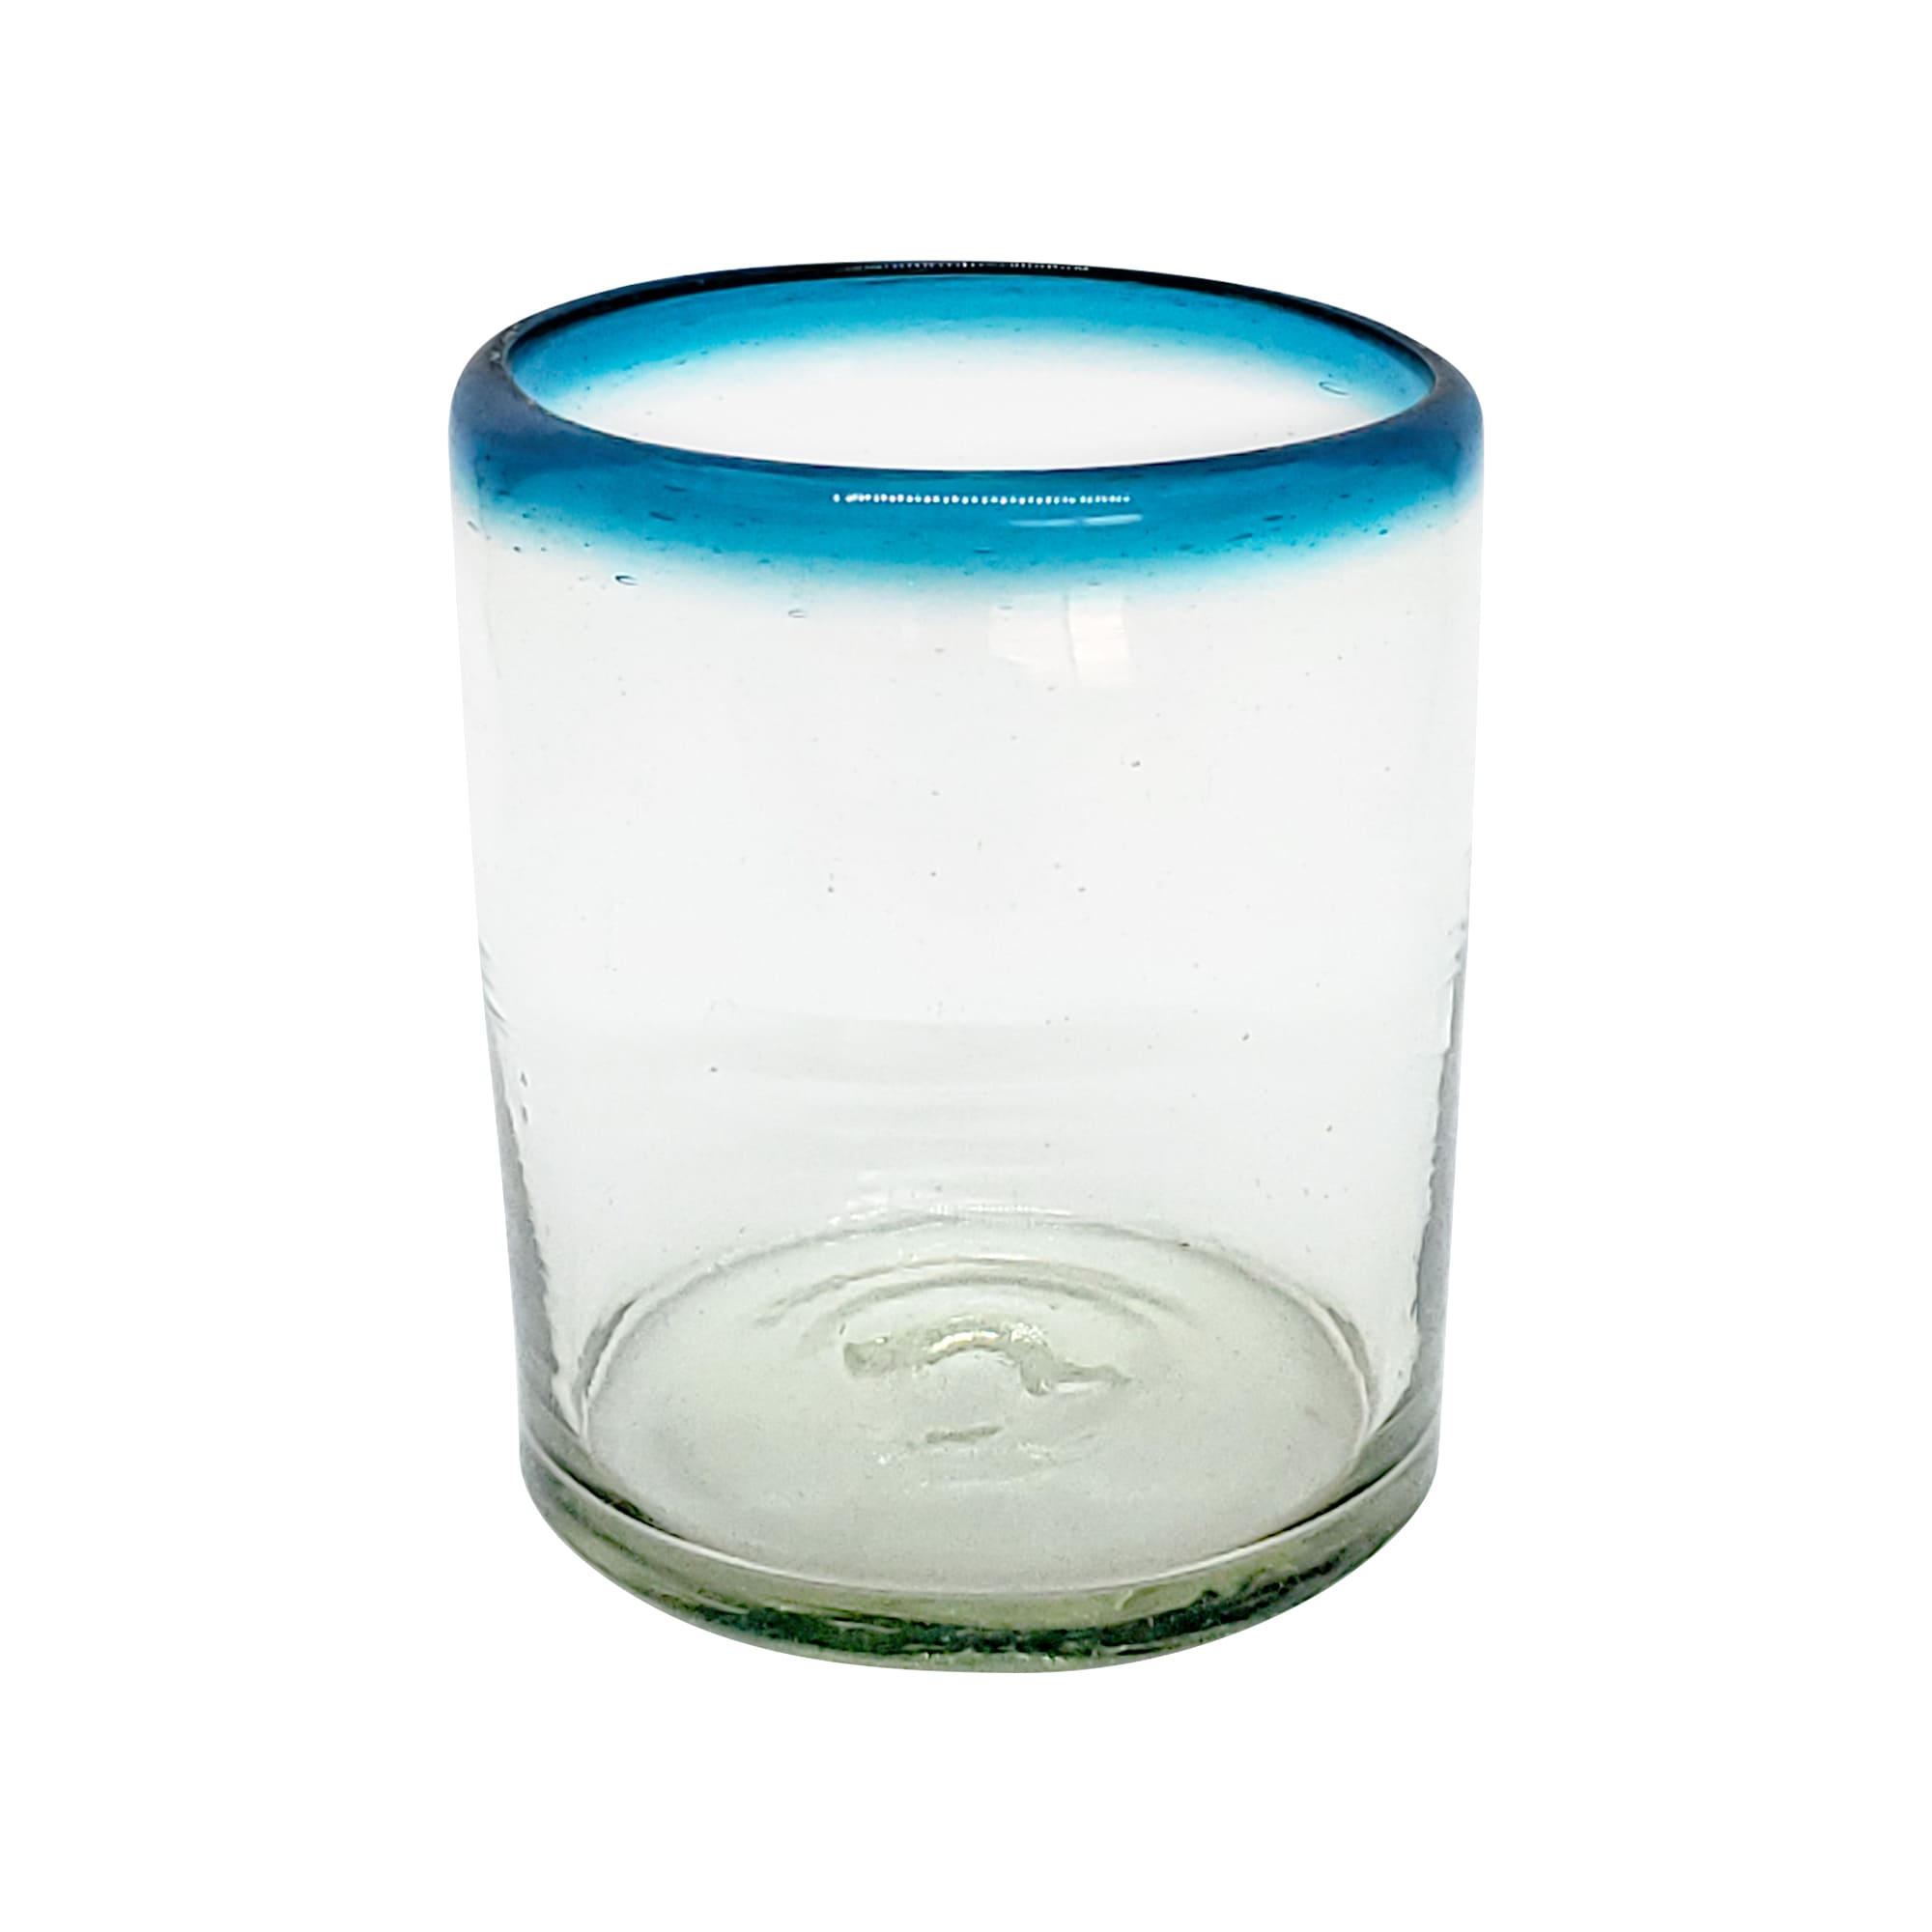 New Items / Aqua Blue Rim 10 oz Tumblers  / These tumblers are a great complement for your pitcher and drinking glasses set.<br>1-Year Product Replacement in case of defects (glasses broken in dishwasher is considered a defect).